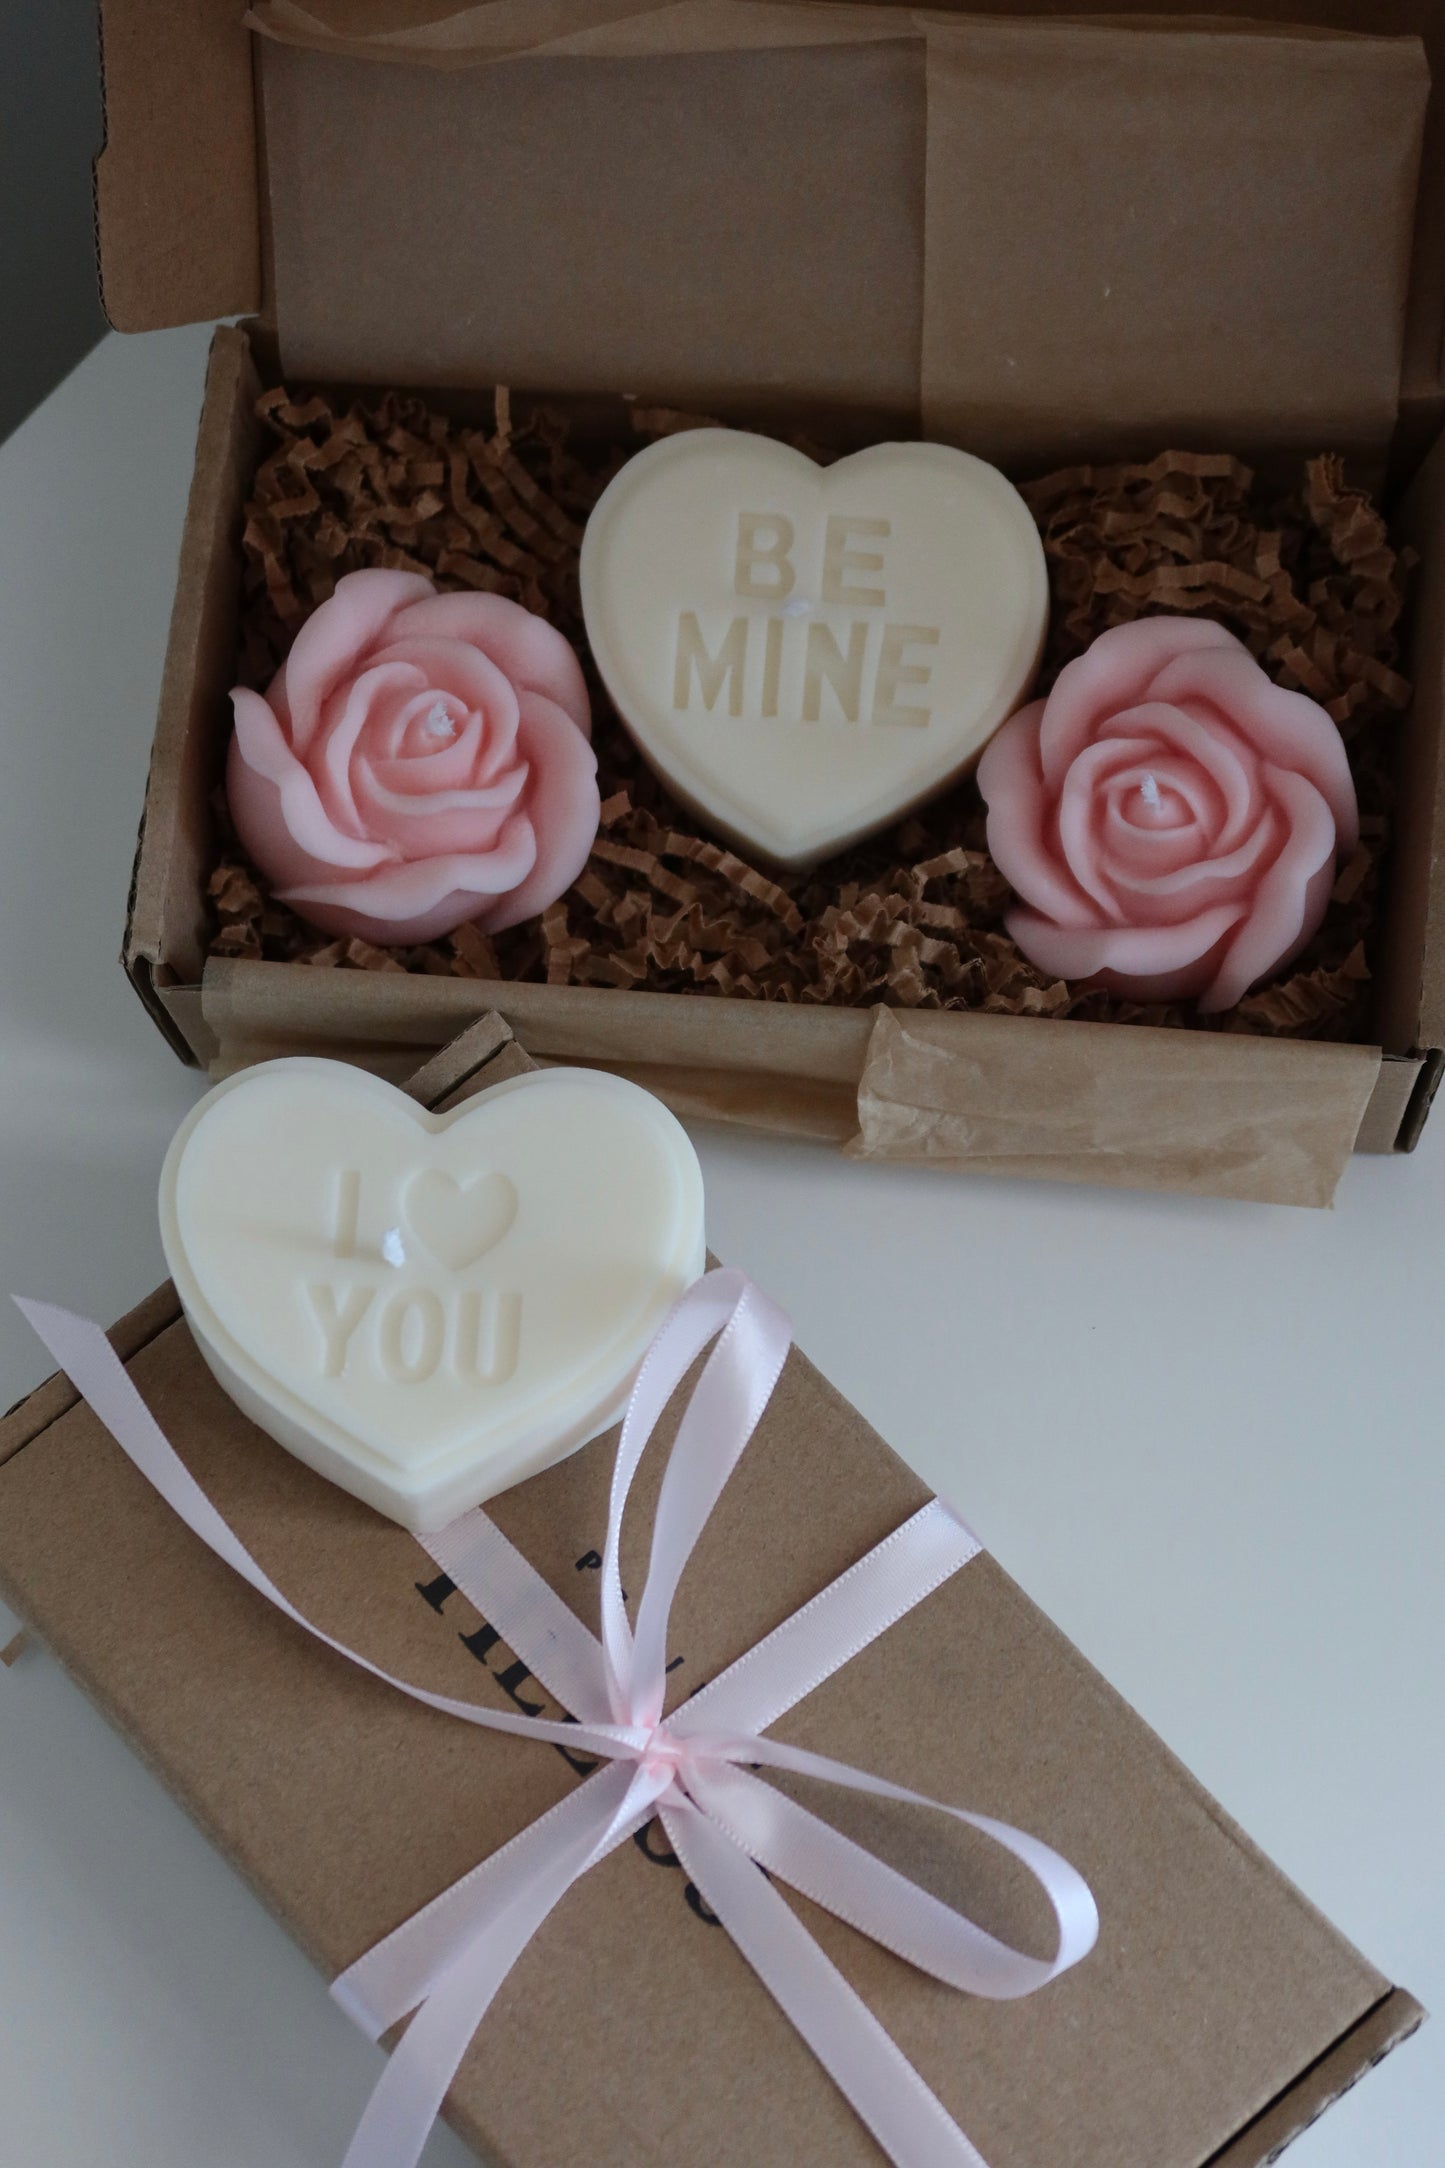 Say it with a candle - Gift Box - Be mine